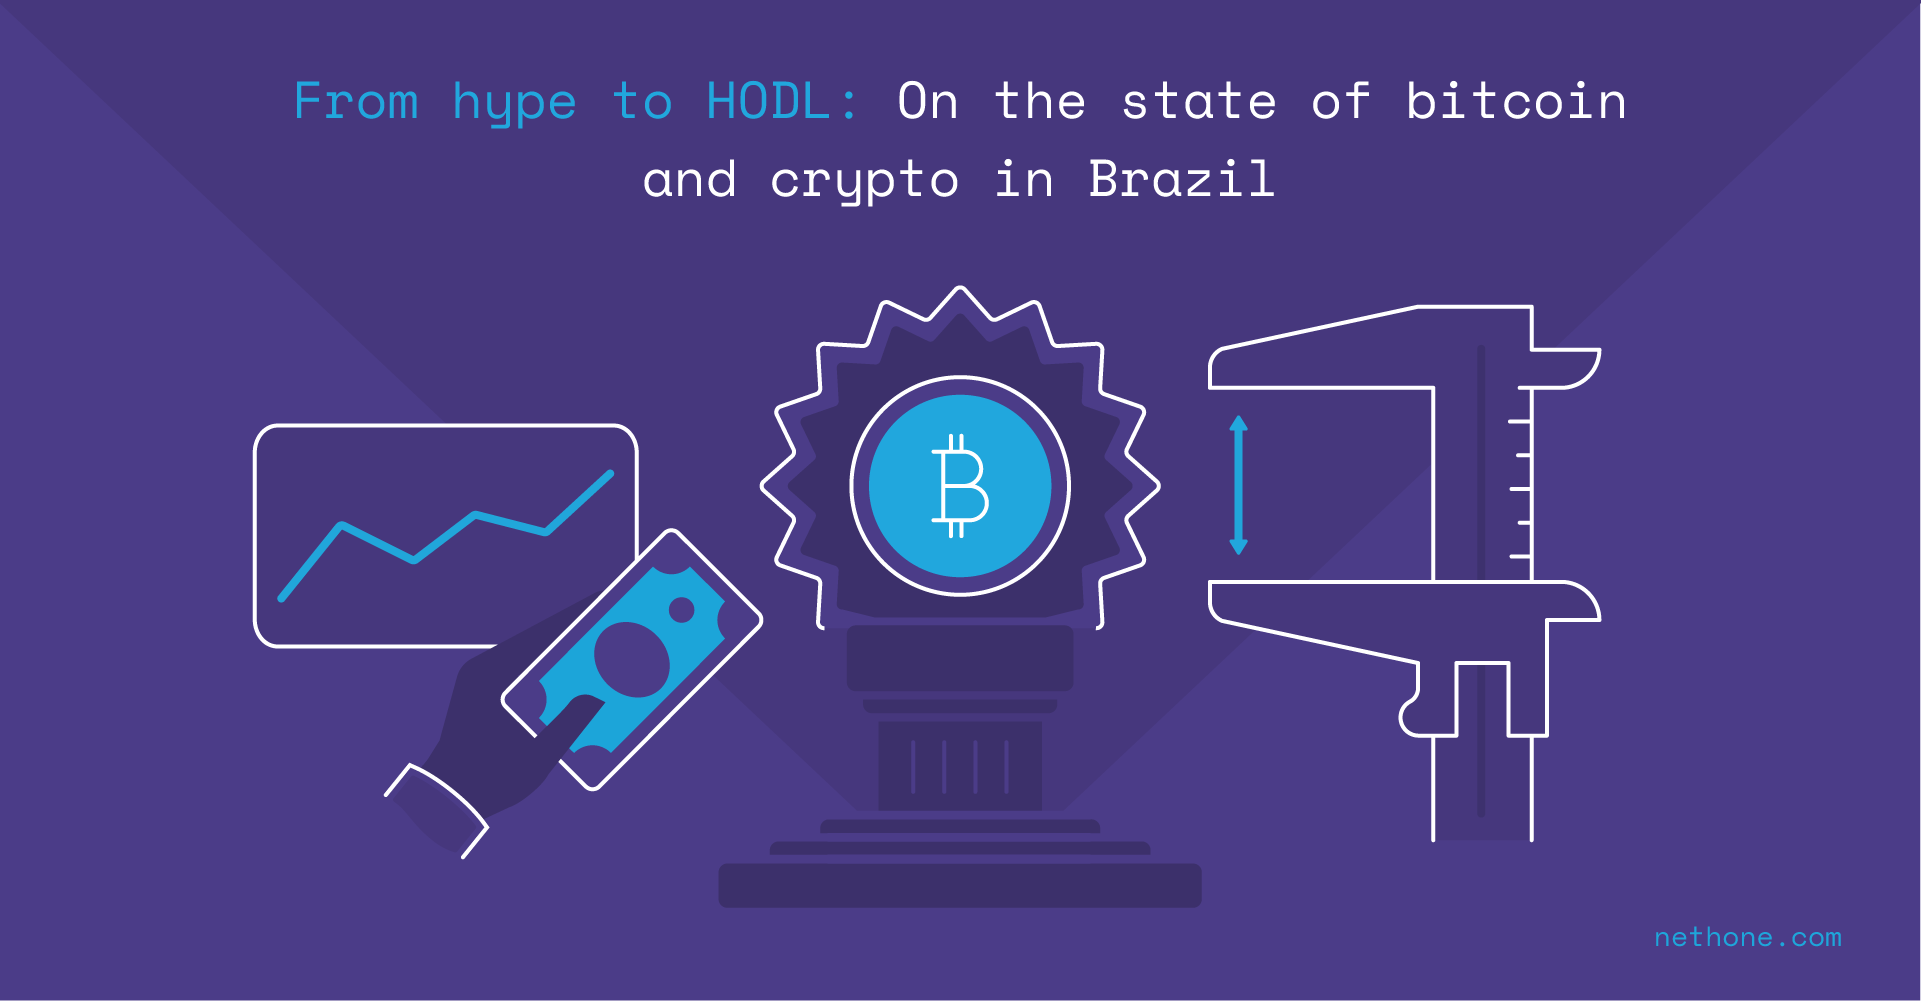 From cryptocurrency hype to HODL Bitcoin prediction and the state of Brazil crypto